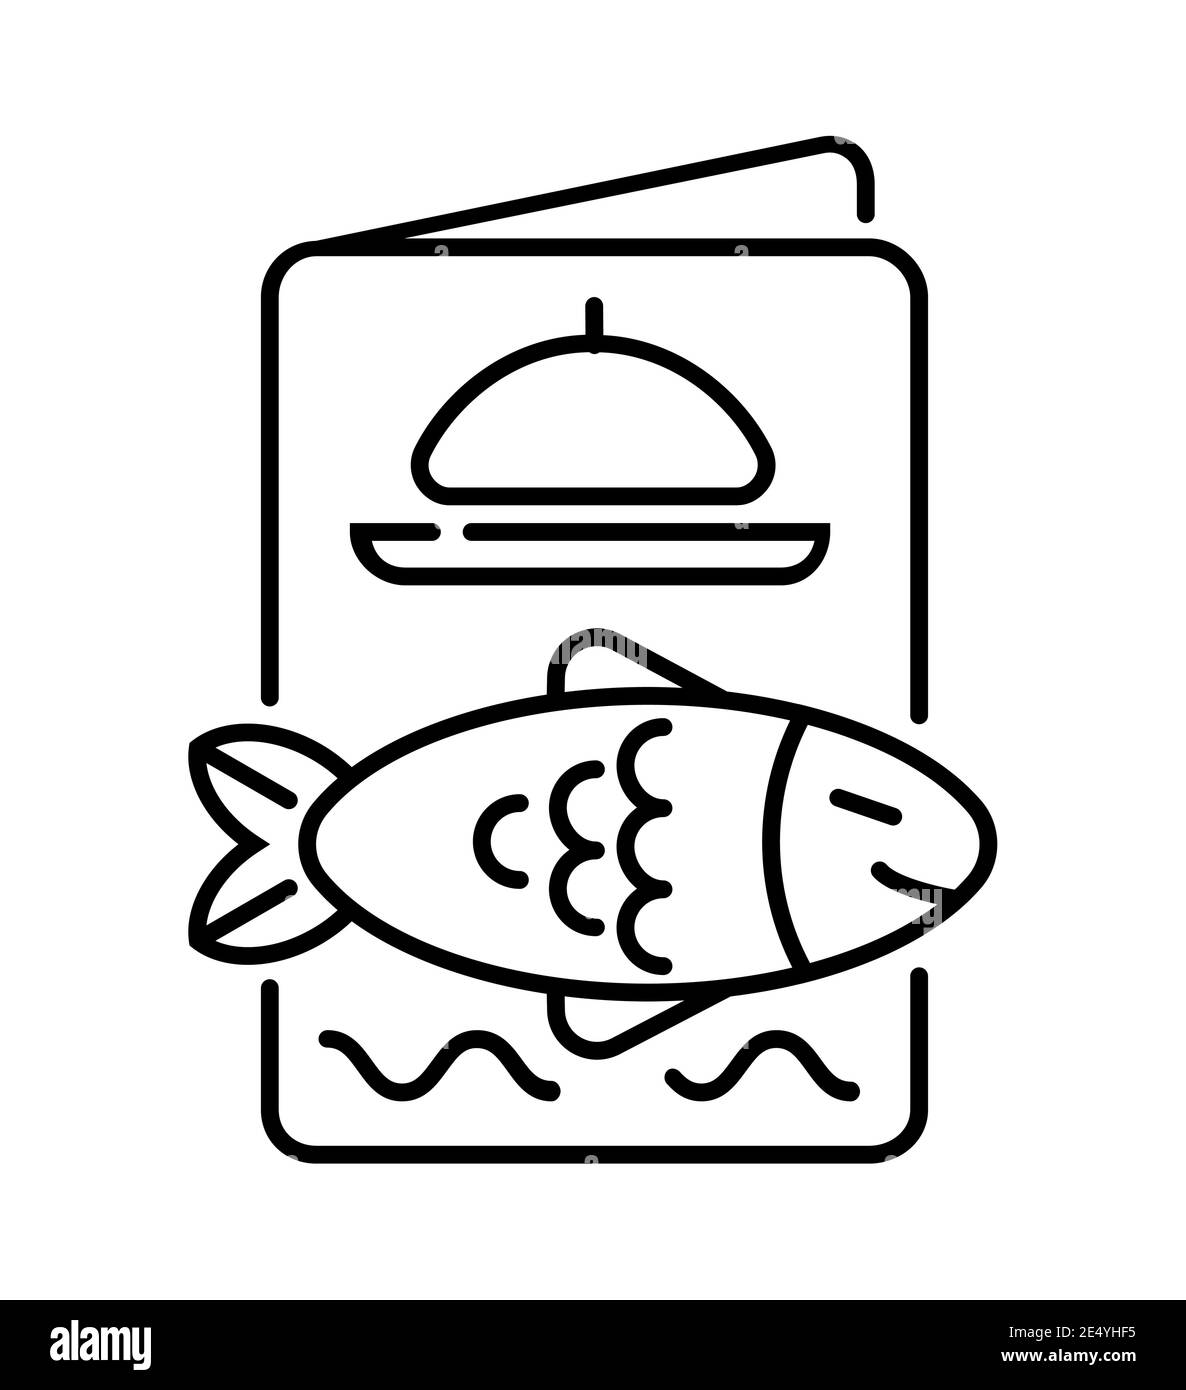 Fish menu icon vector. List of menu and seafood, salmon are shown in outline style. Herring, mackerel is shown. Pollock, carp, halibut, trout sign in Stock Vector